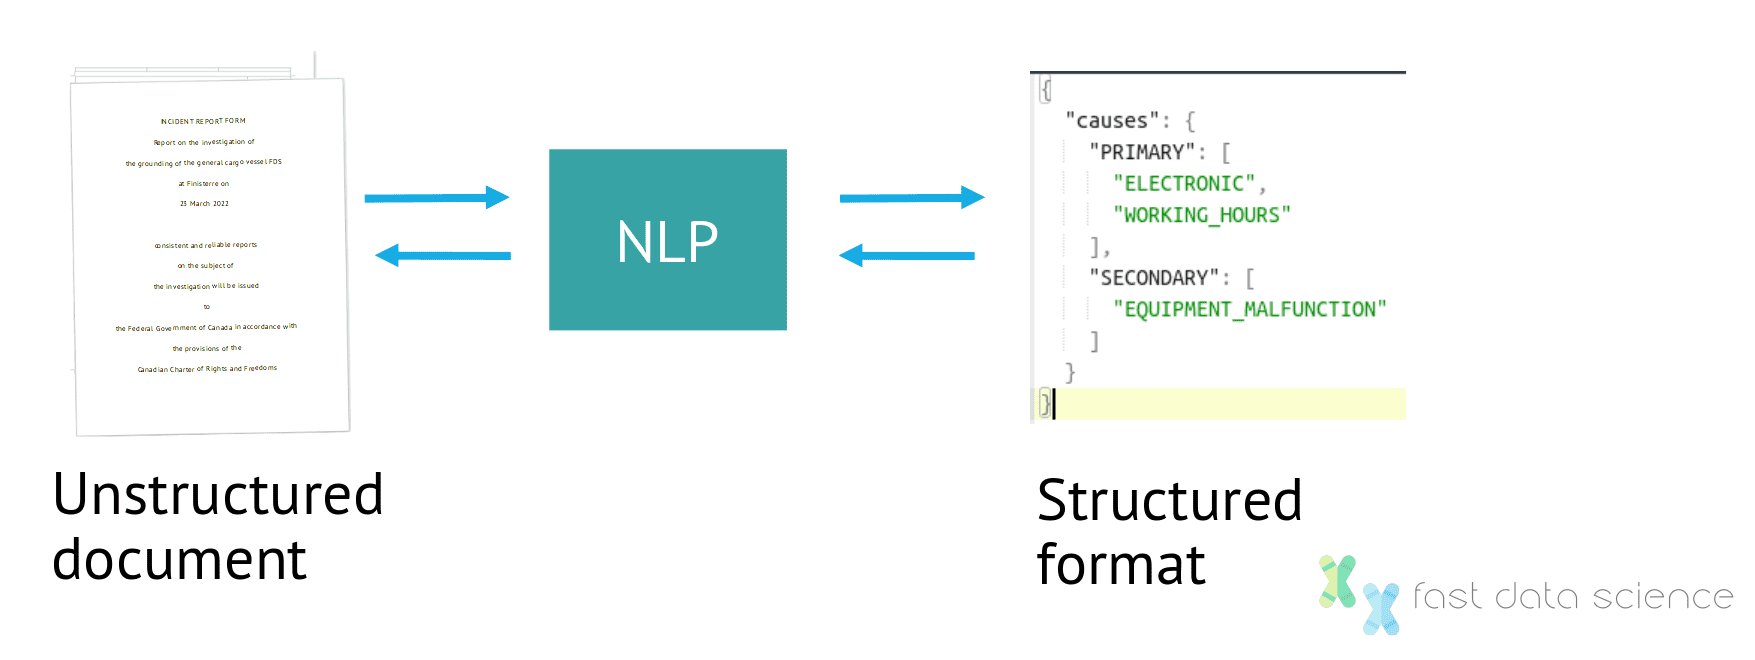 Natural language processing translates between an unstructured and structured data format, such as a PDF of an accident report and a computer-readable representation of the relevant information.